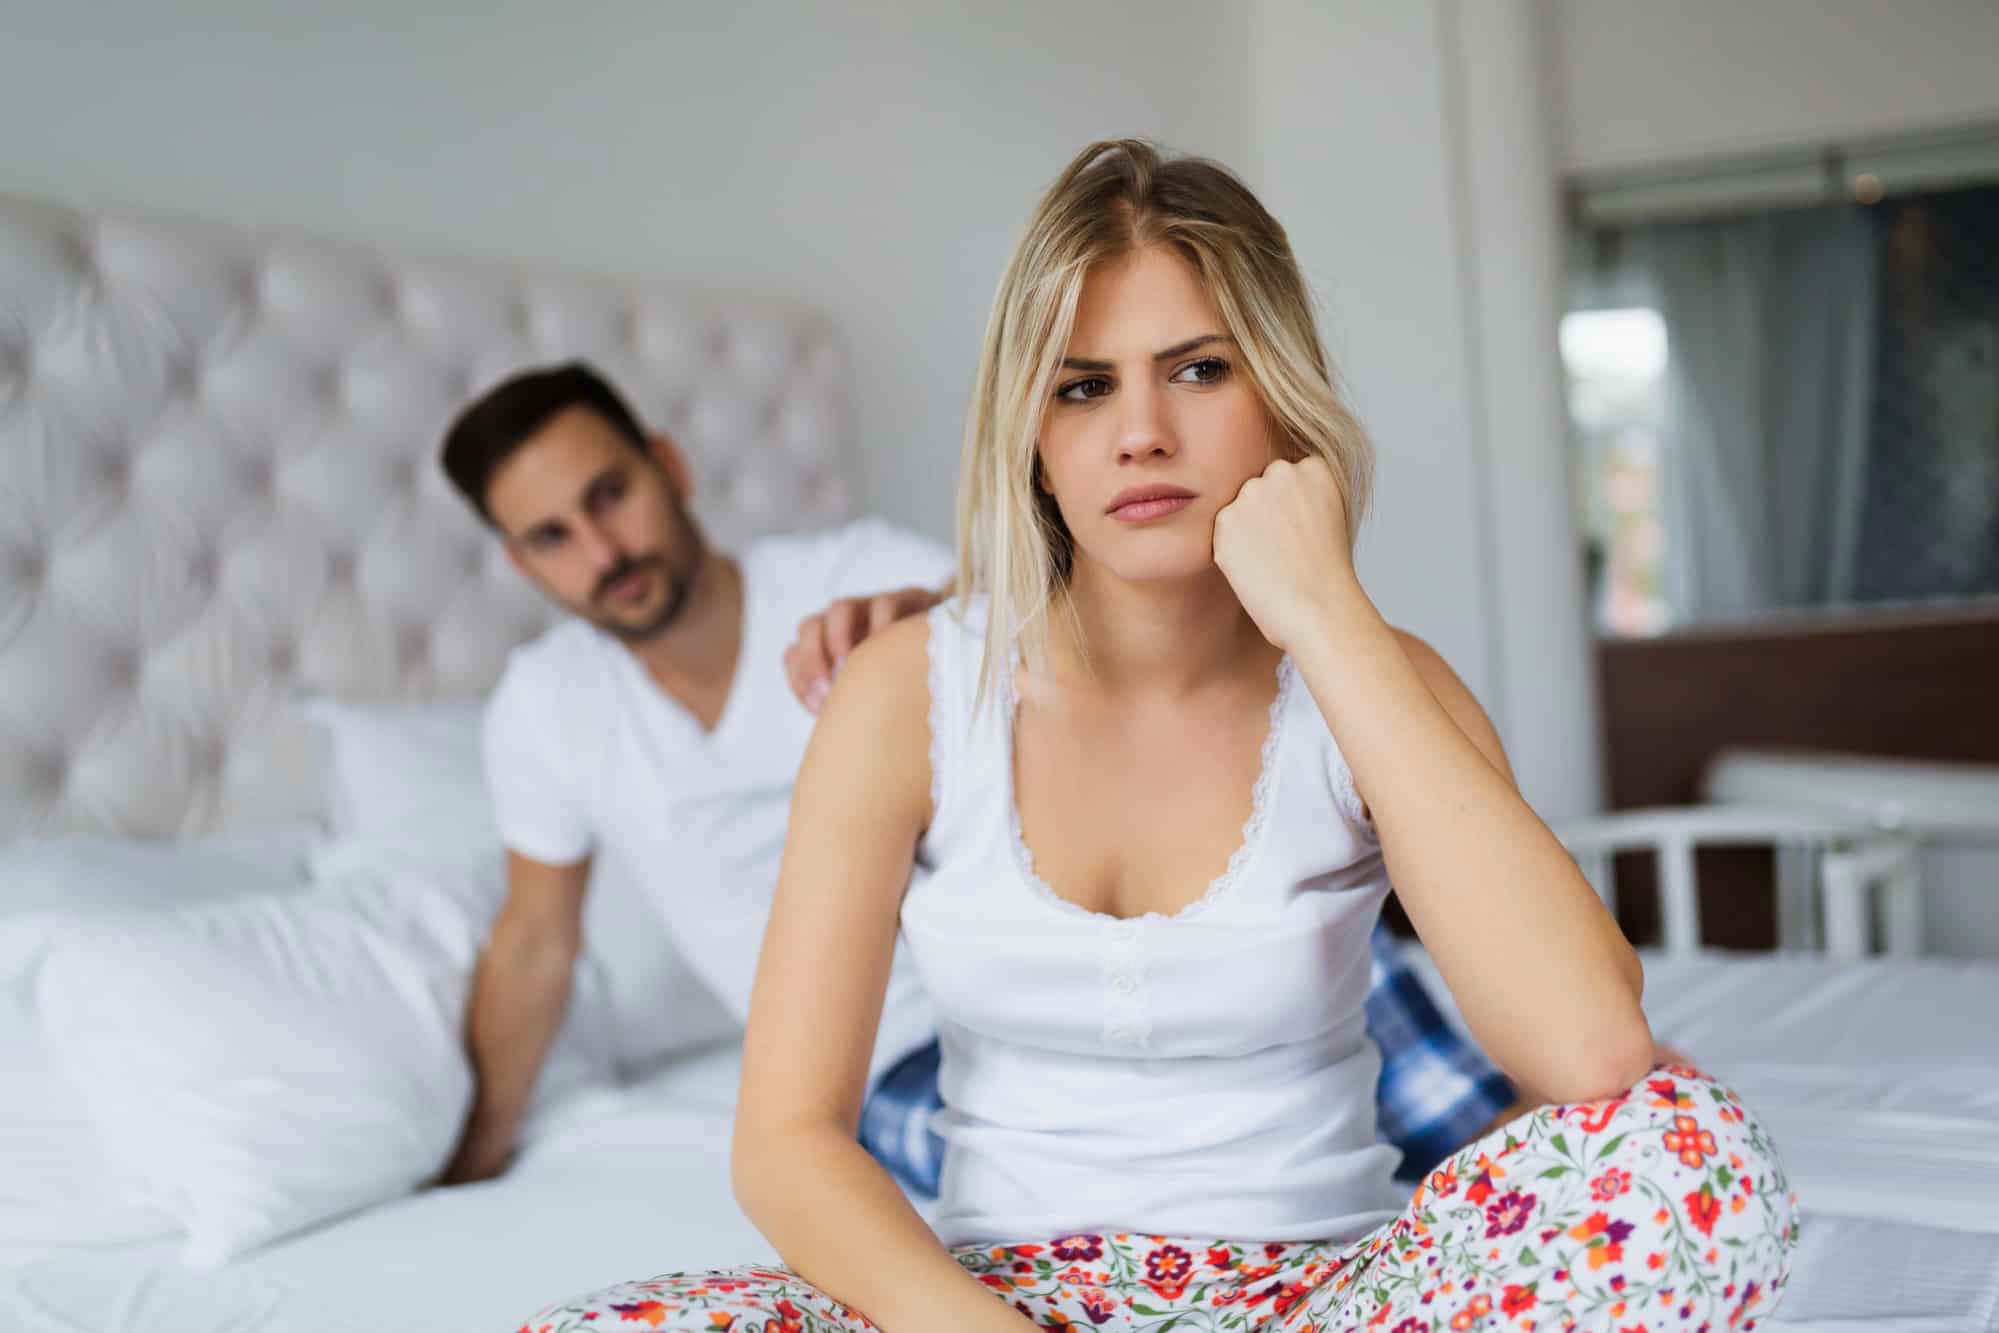 12 Most Common And Easily Avoidable Mistakes Guys Make With Women